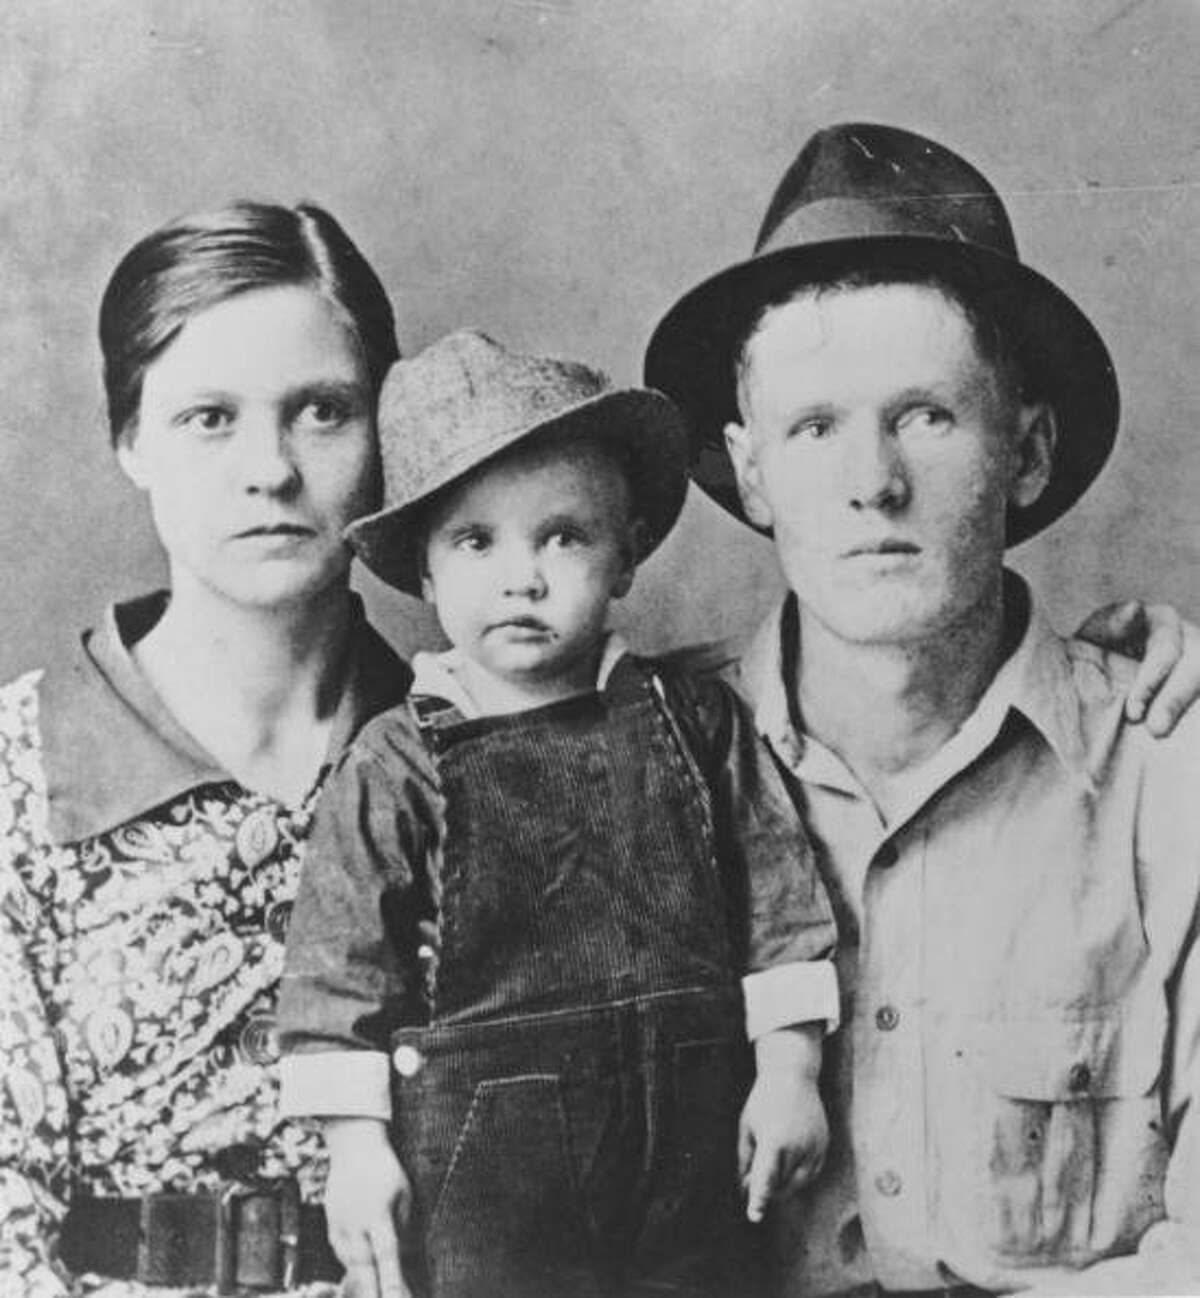 Rock and roll singer Elvis Presley poses for a family portrait with his parents Vernon Presley and Gladys Presley in 1937 in Tupelo, Mississippi. (Photo by Michael Ochs Archives/Getty Images)